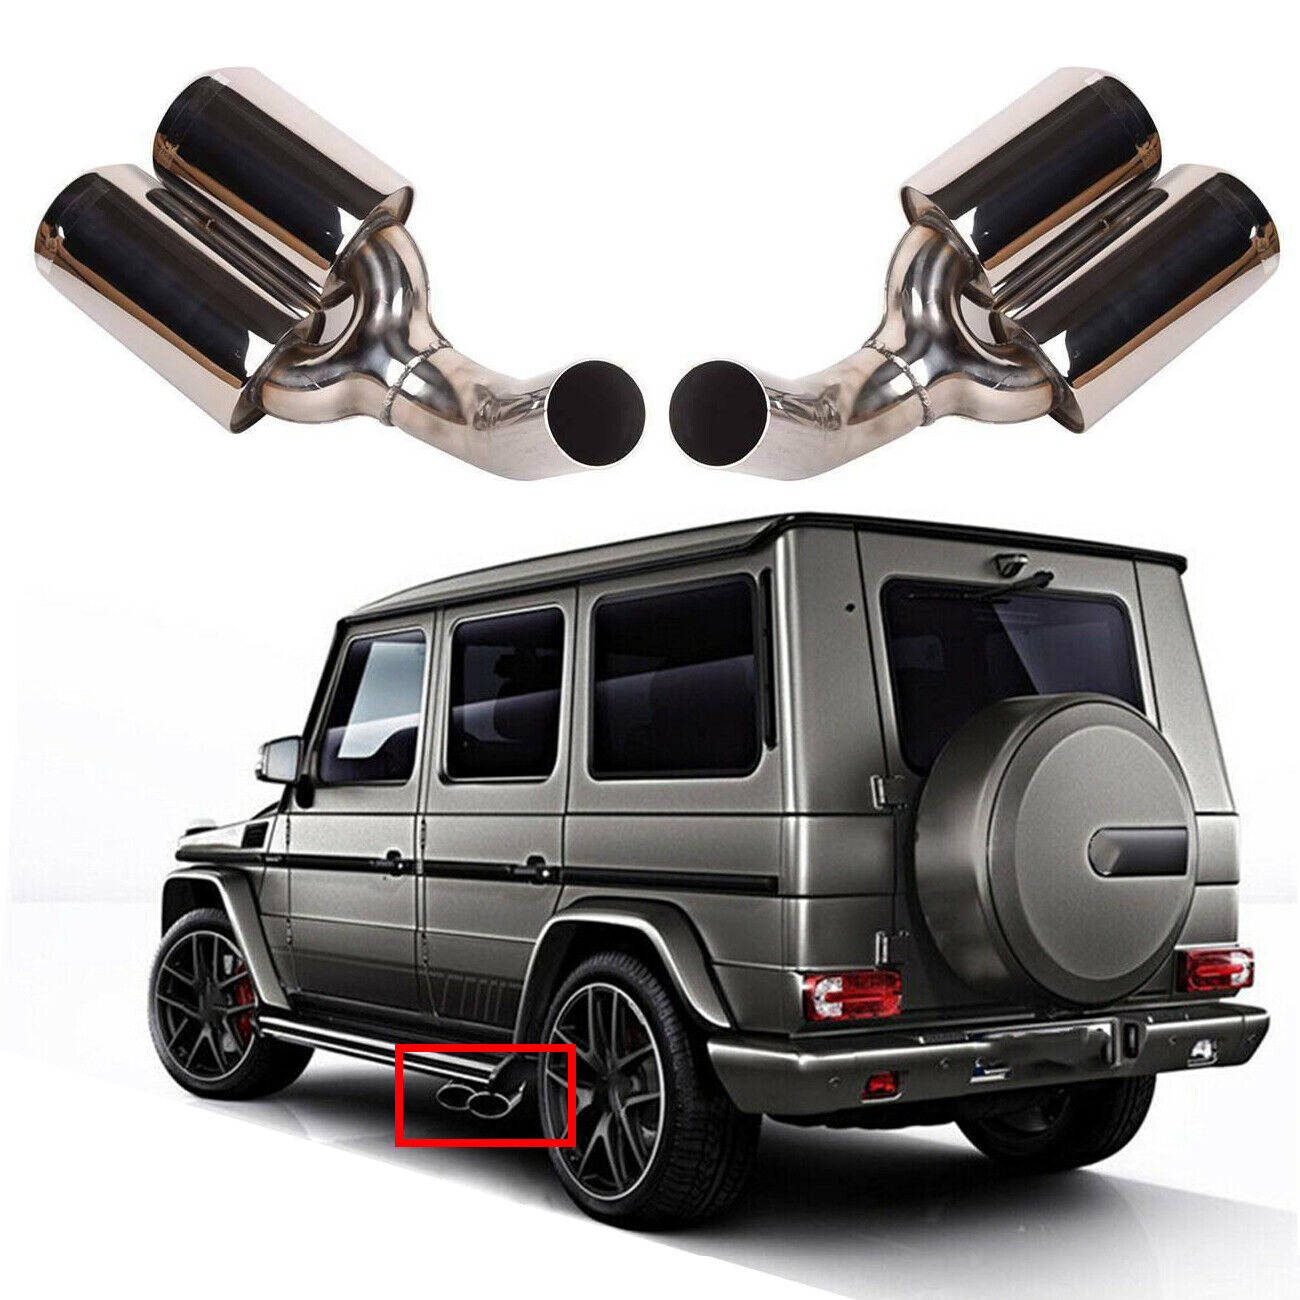 Stainless Steel Exhaust Pipe Tip Muffler For Benz G-Class G63 AMG W463 2007-2015